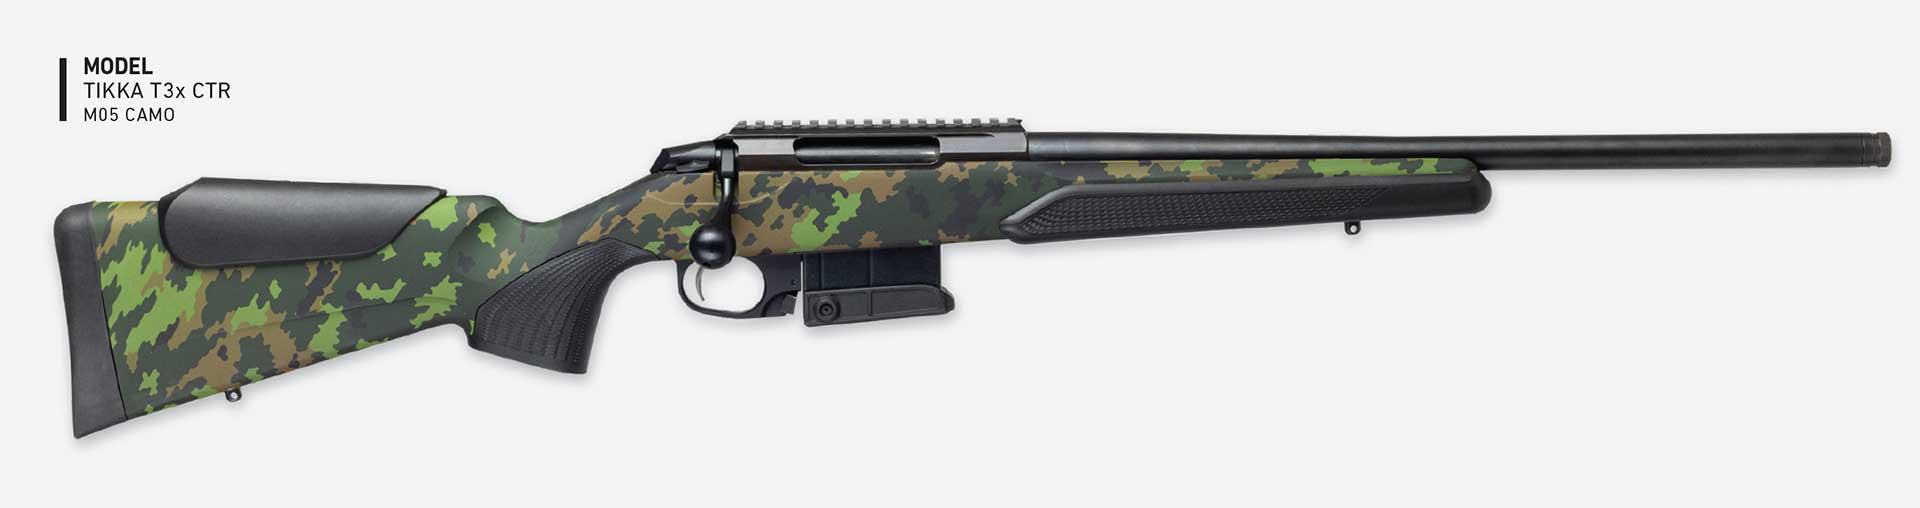 Right side of the camouflage-finished Tikka T3x CTR M05 bolt-action rifle.